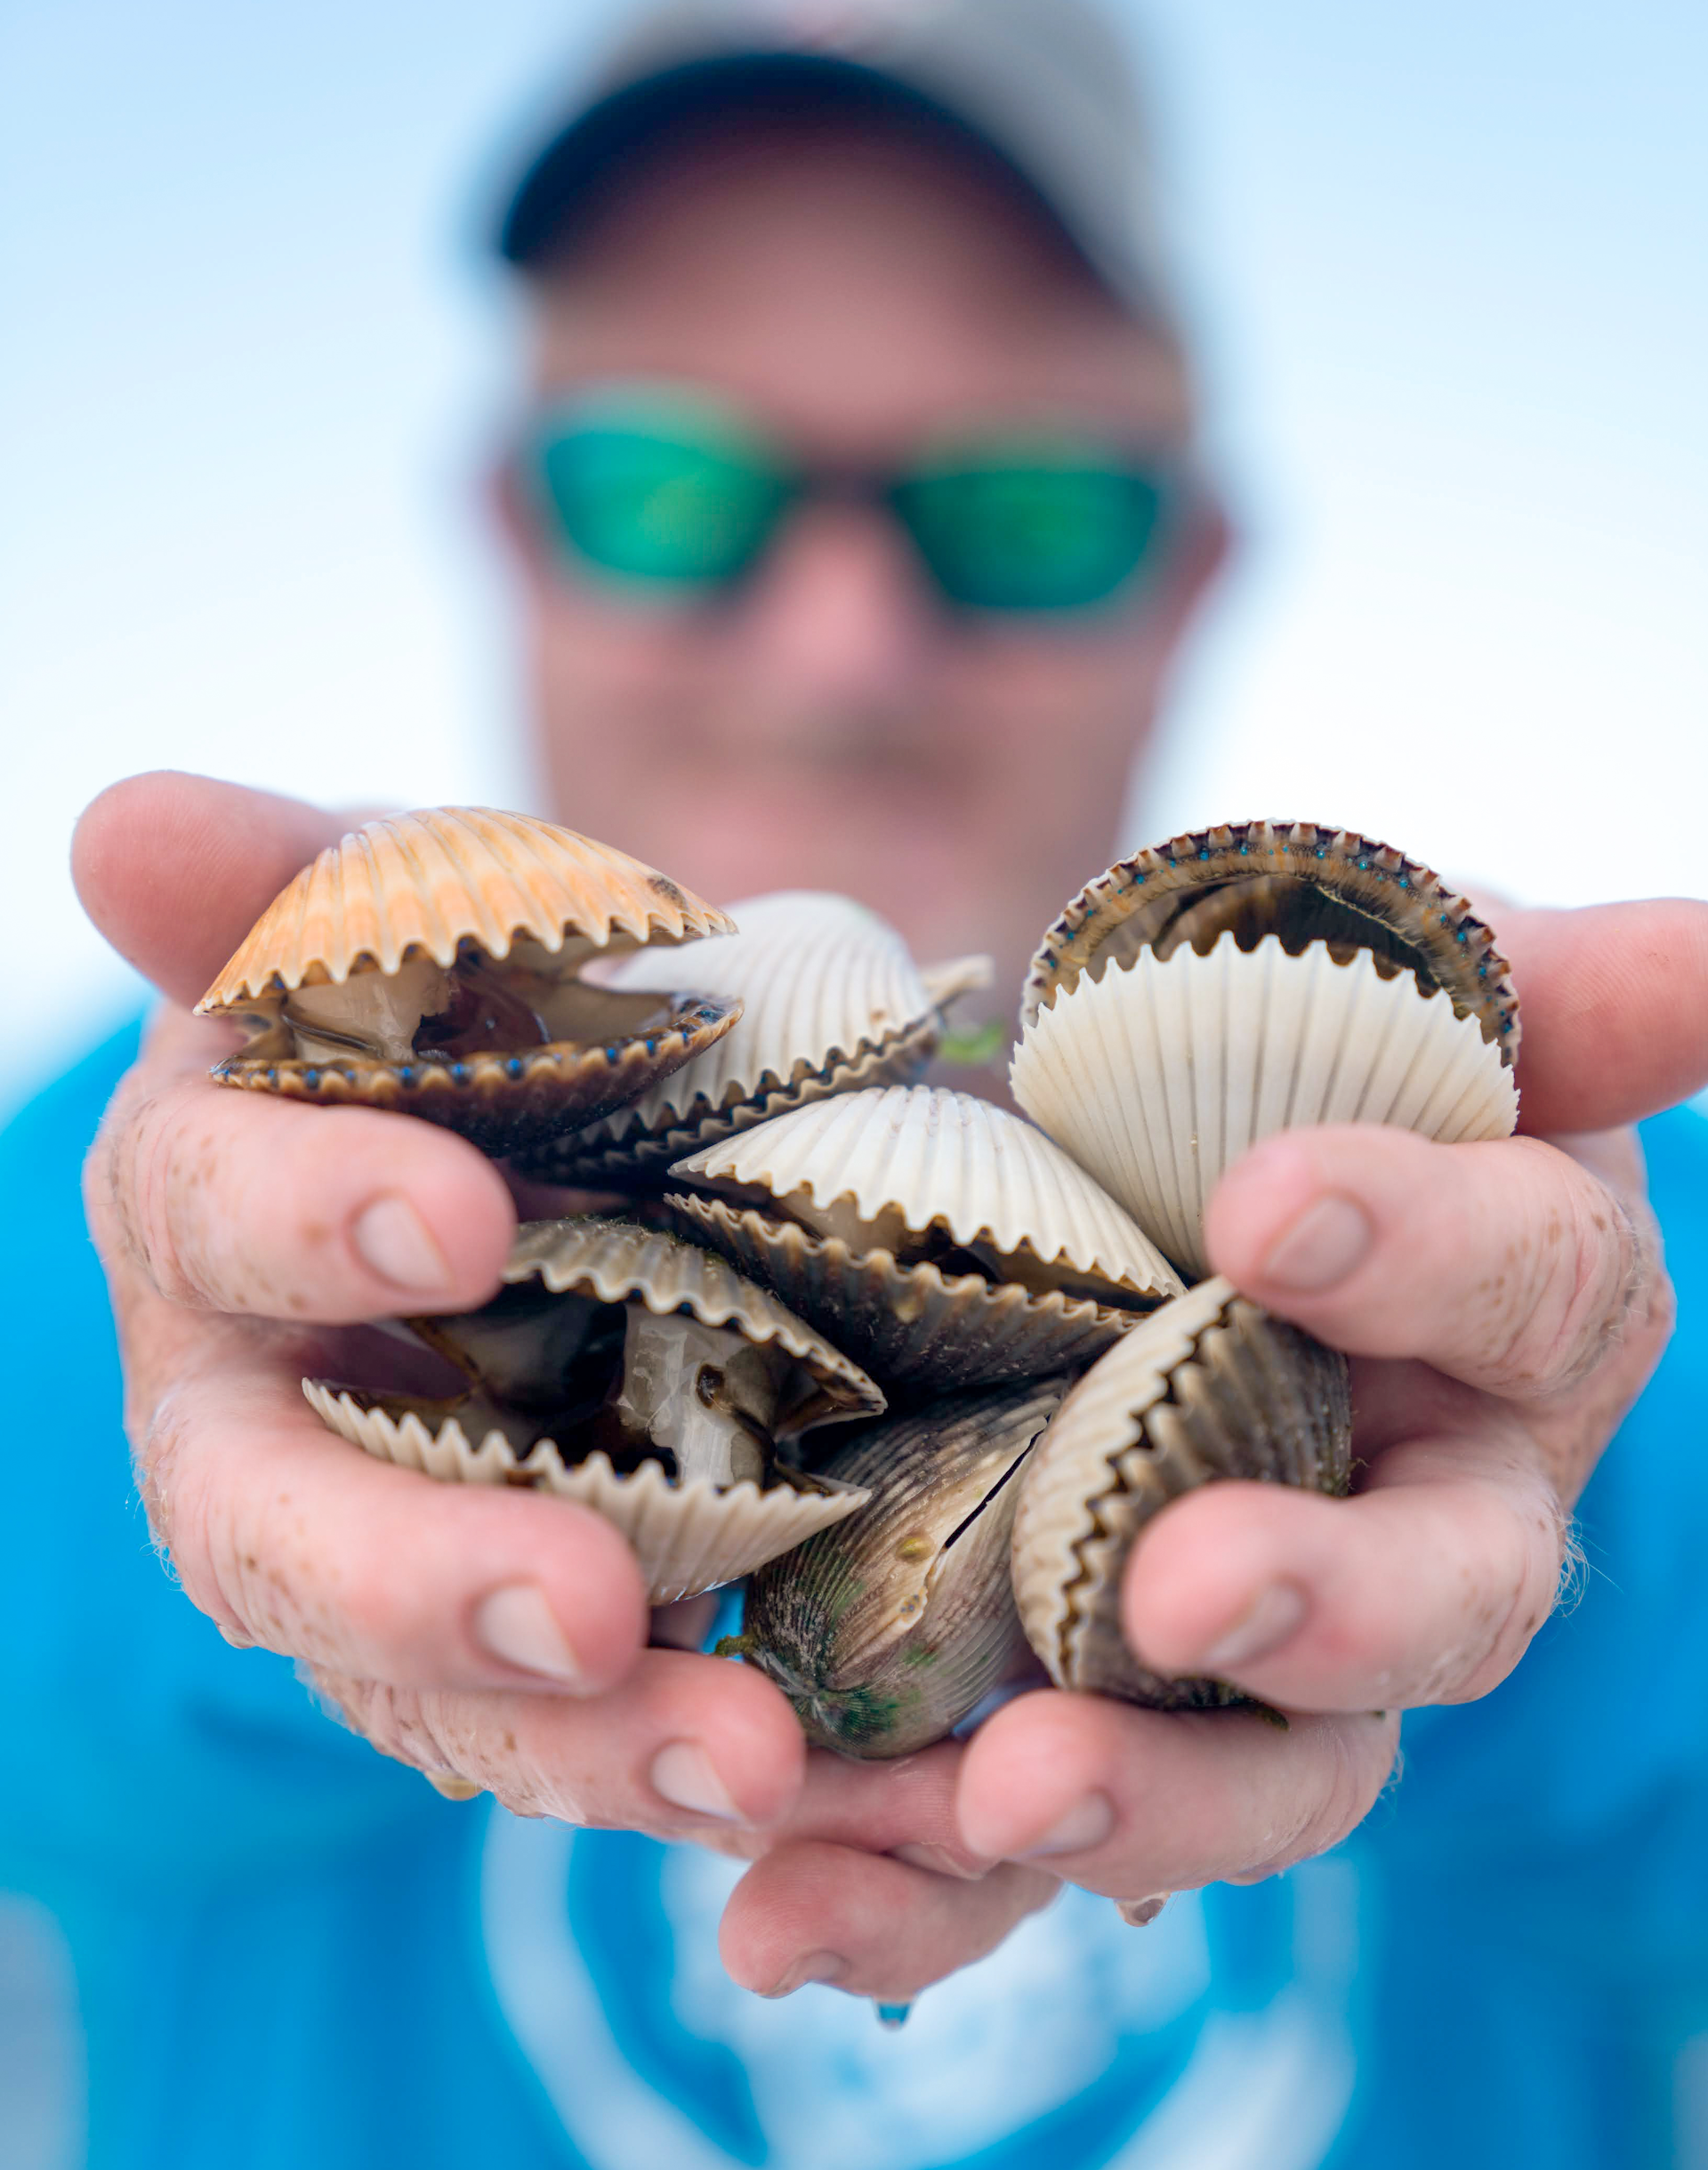 A man holding two handfulls of scallops in Florida